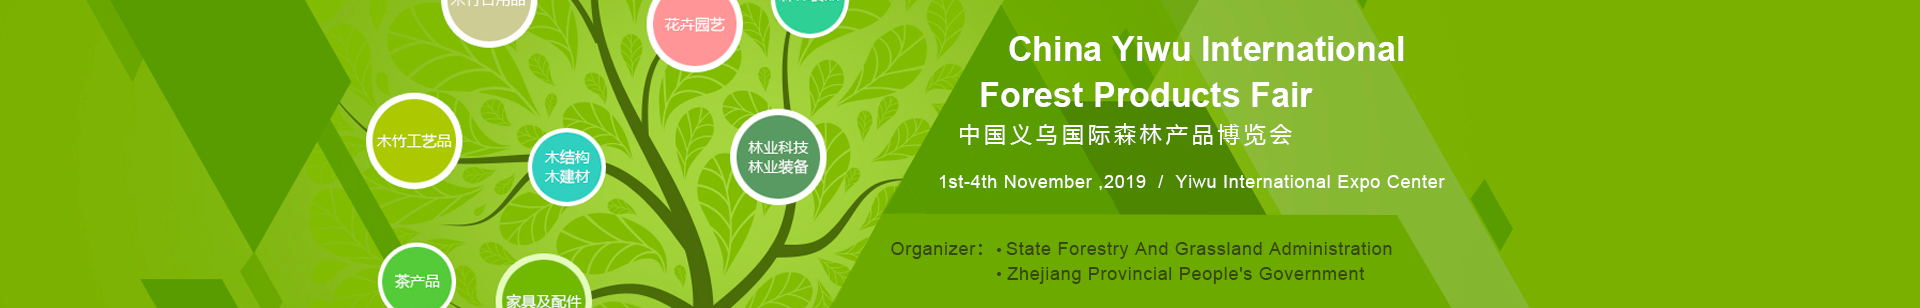 China Yiwu International Forest Products Fair